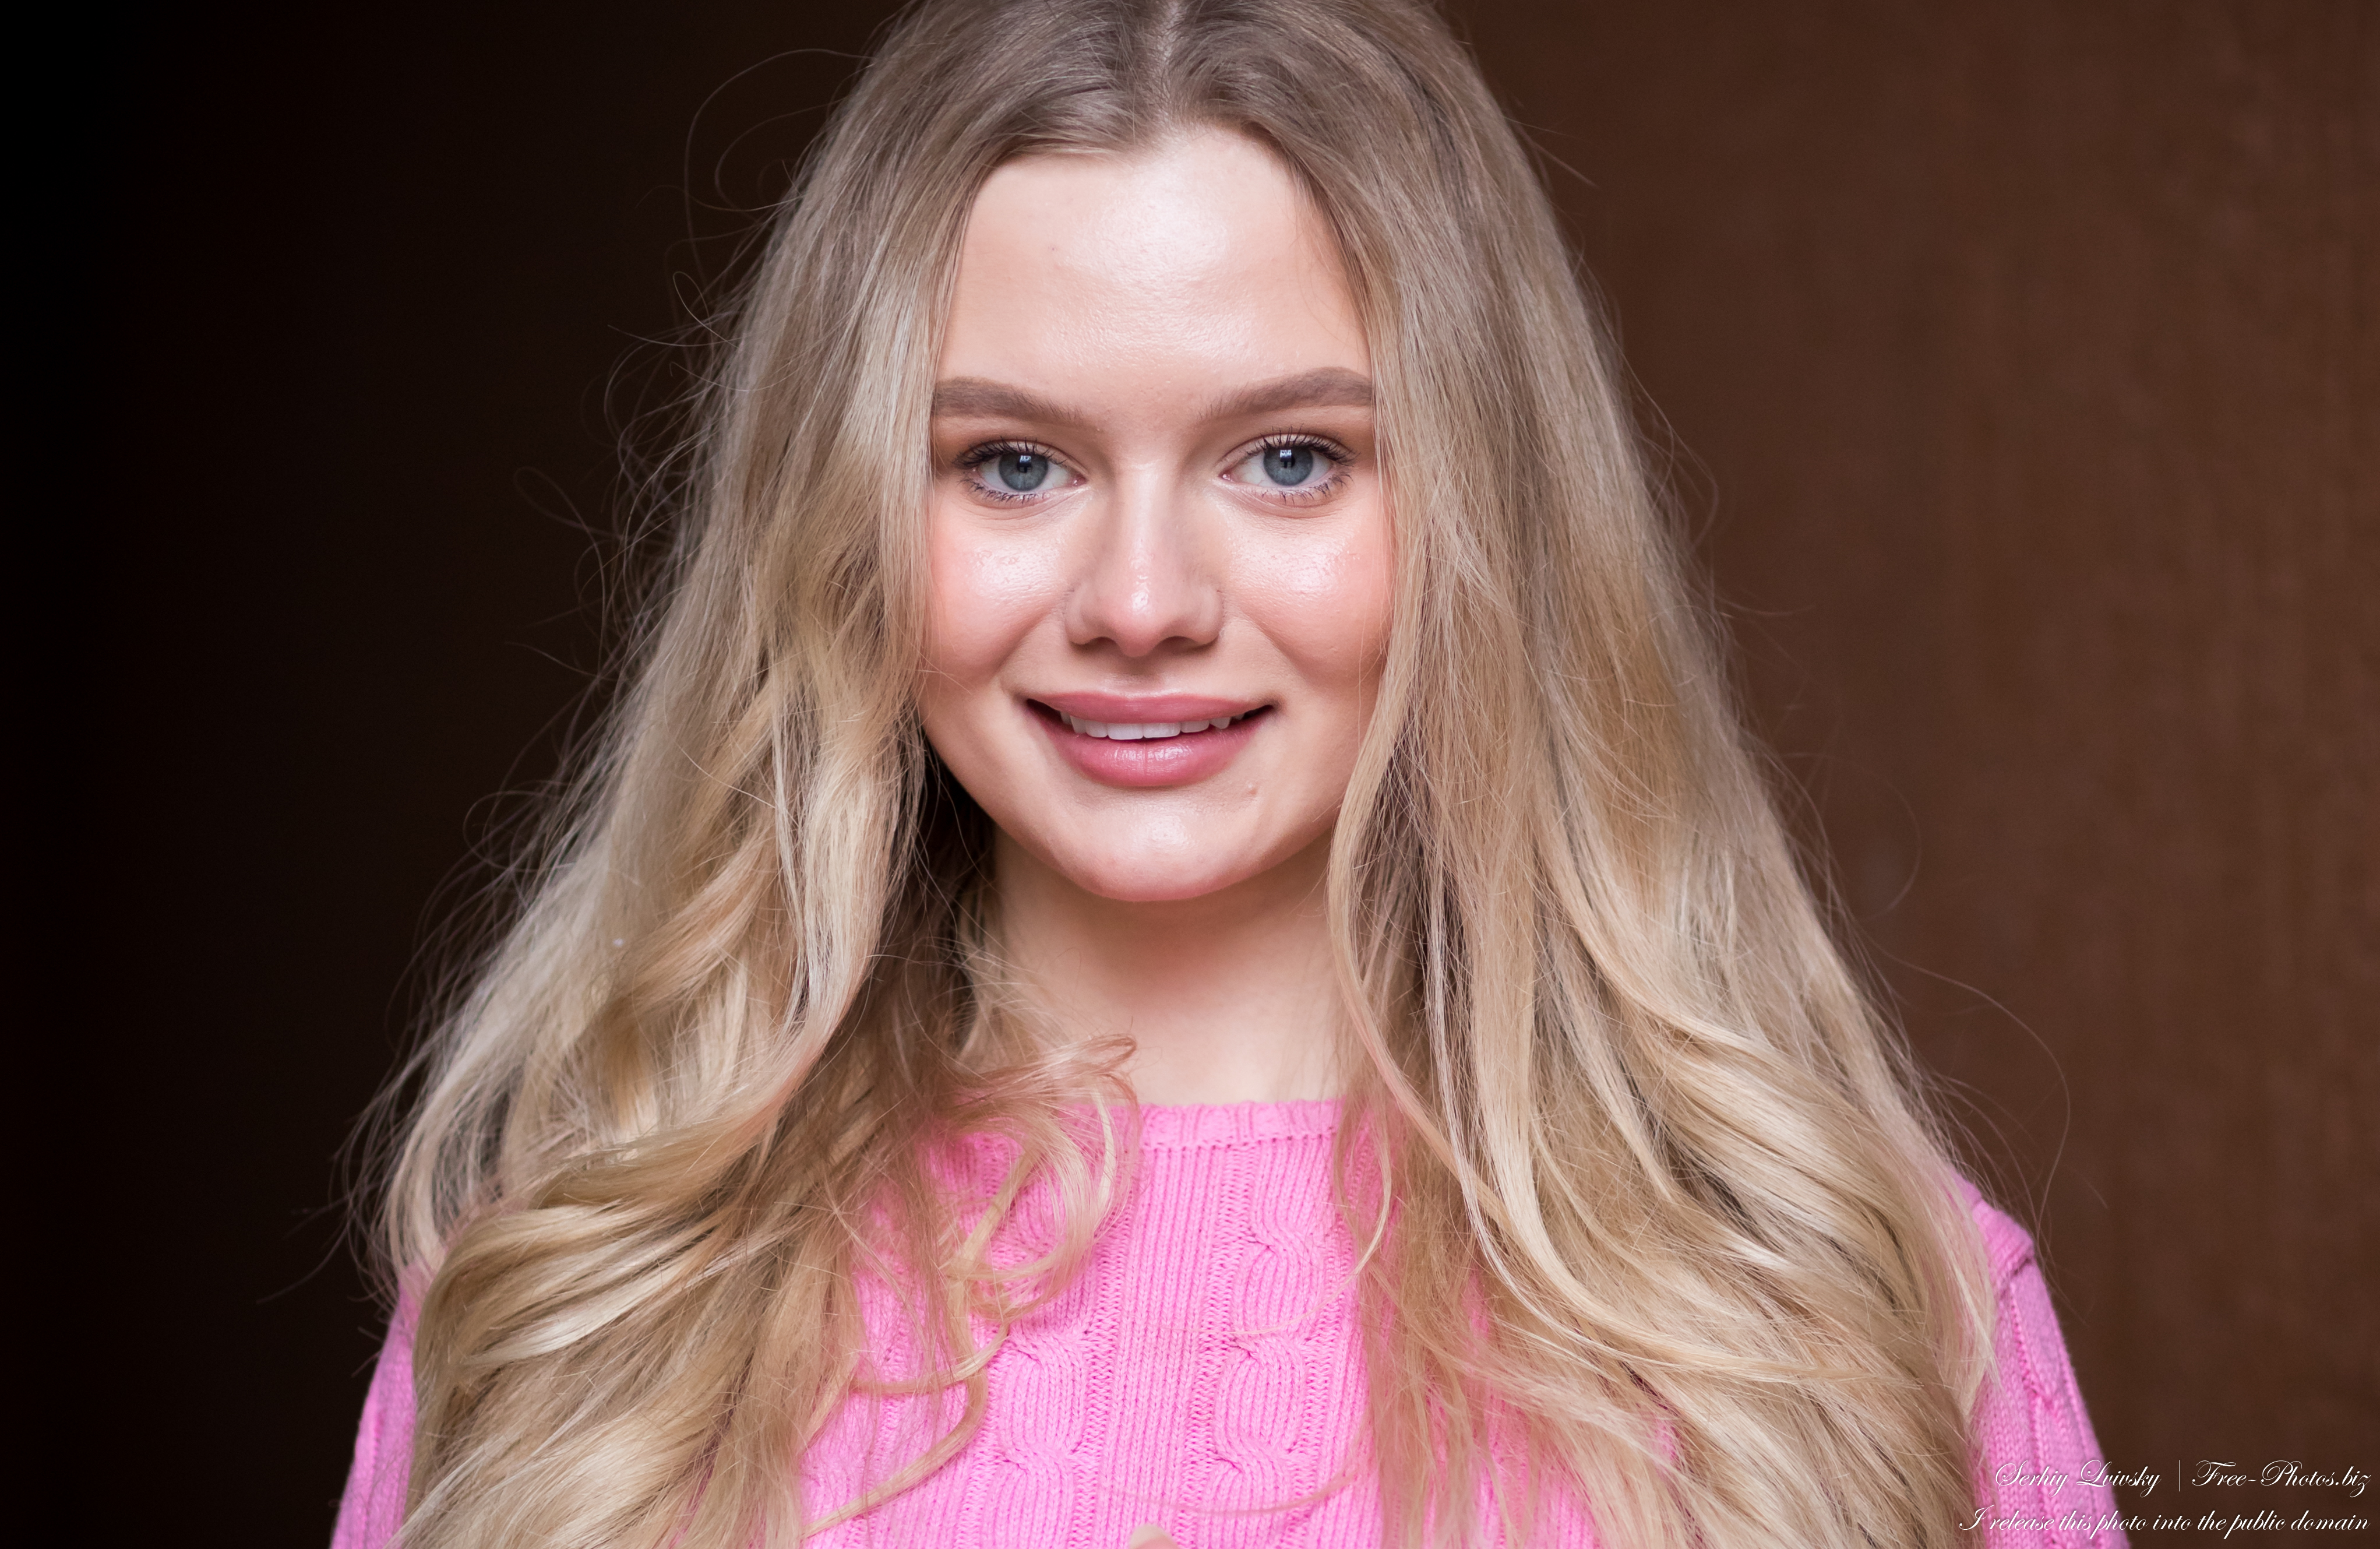 Oksana - a 19-year-old natural blonde girl photographed by Serhiy Lvivsky in March 2021, picture 14